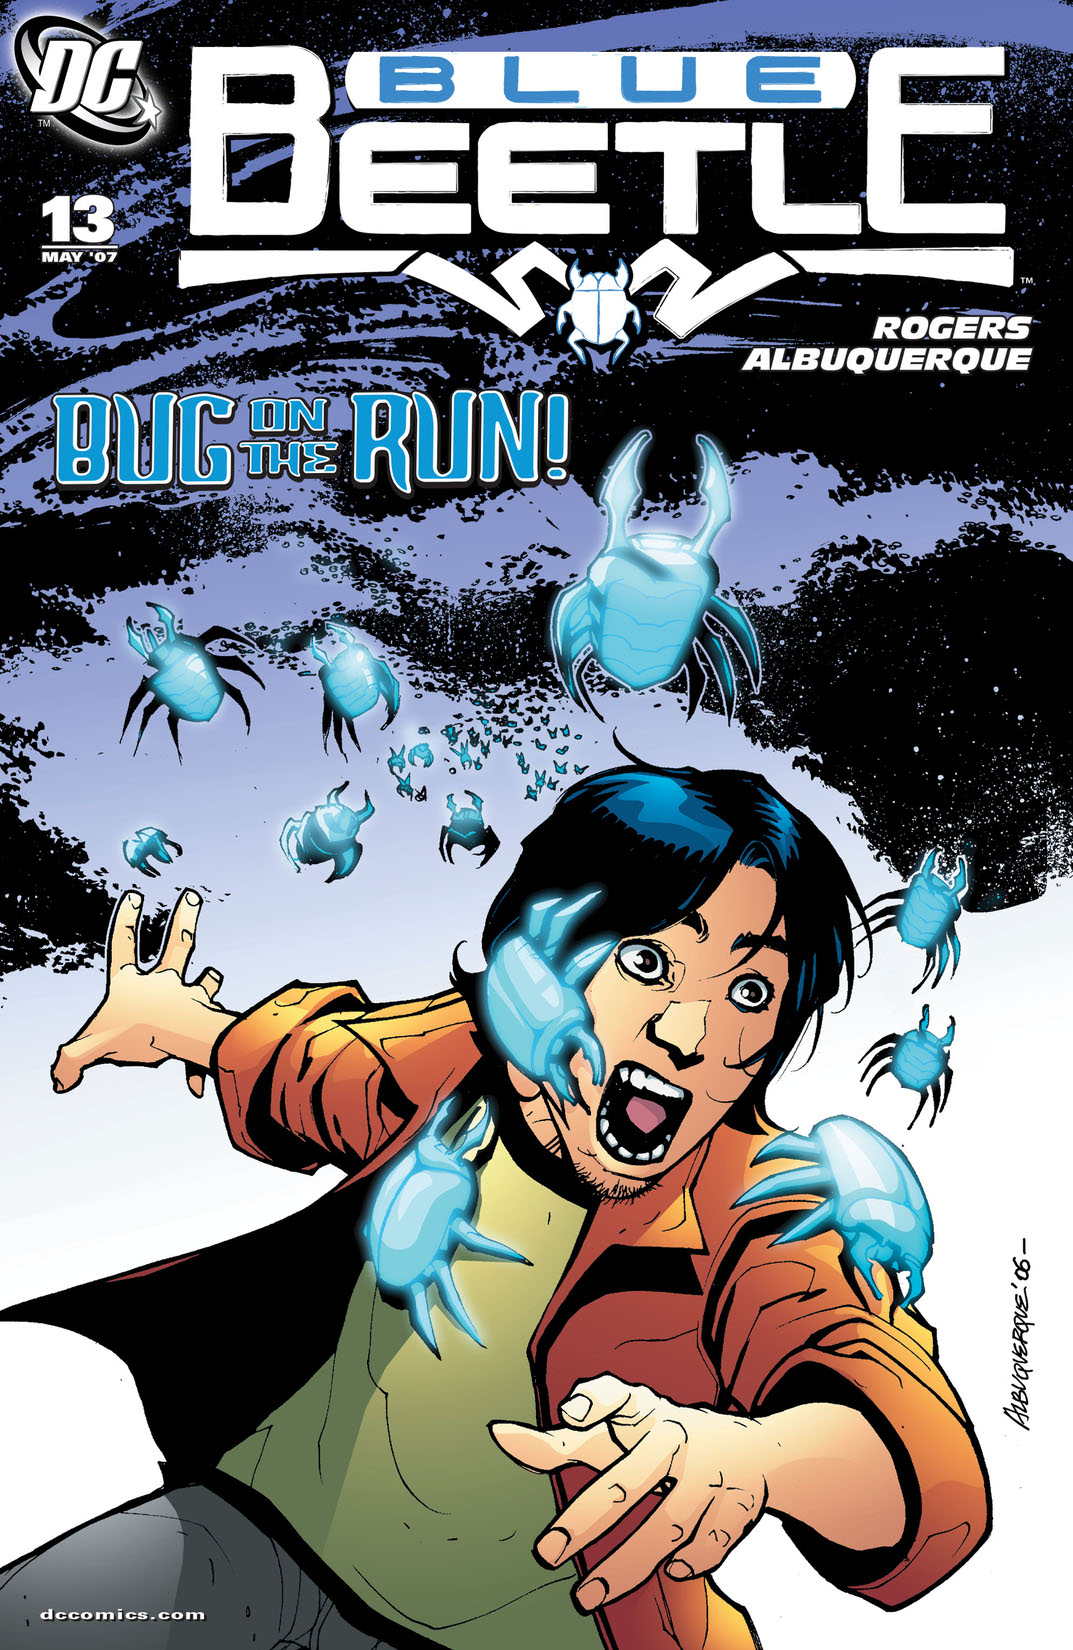 Blue Beetle (2006-) #13 preview images